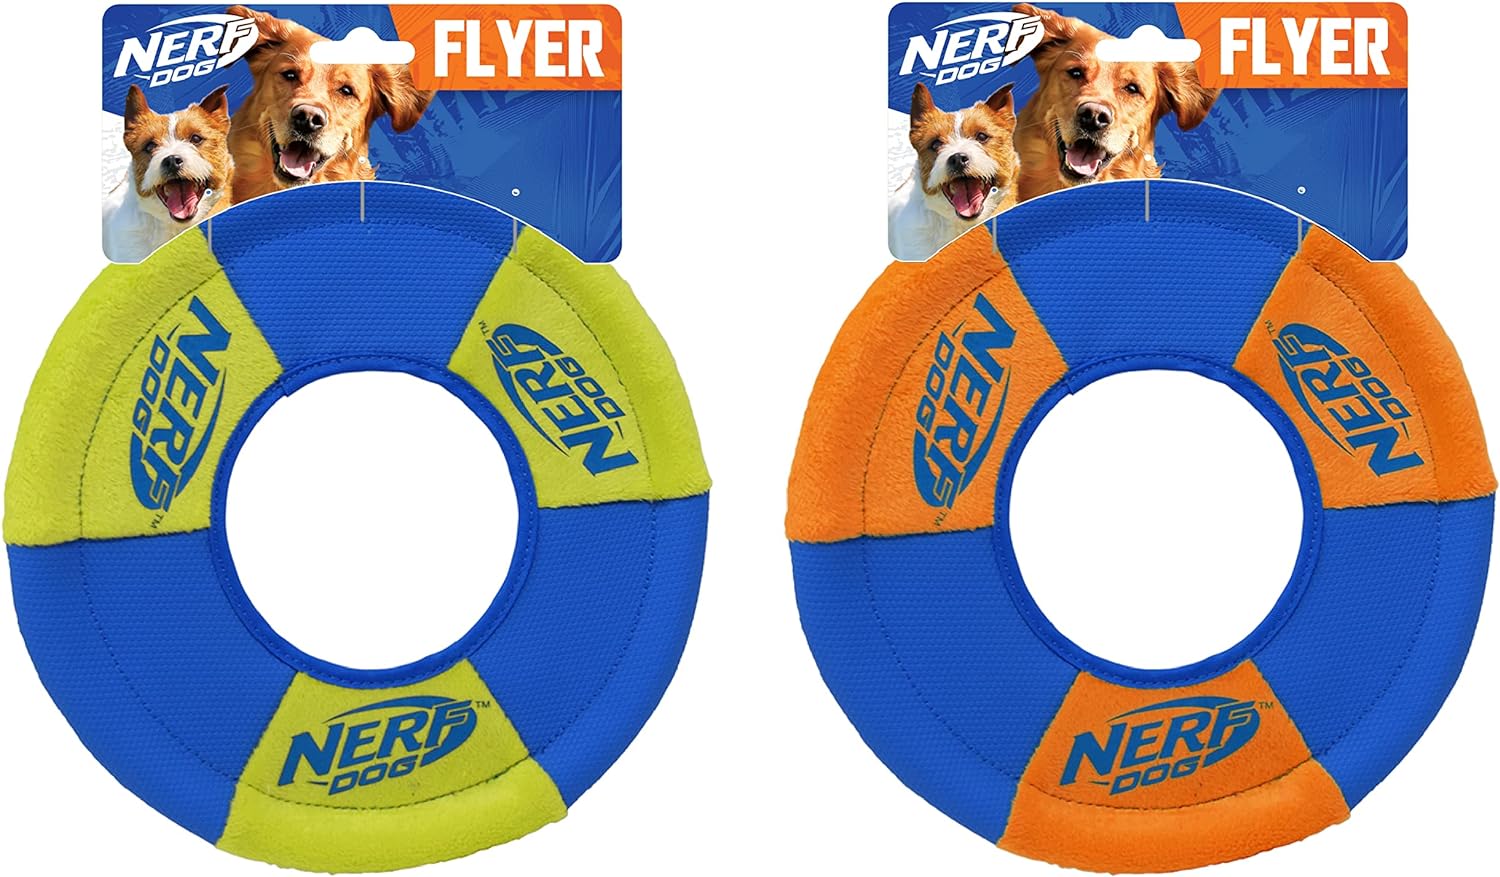 My dog loves them but they dont last very long. The foam edge inside the nylon has a gap in it and it will eventually warp the disc. They do fly well and are very easy for the dog to catch. Just buy multiples if your dog really likes them like mine does.